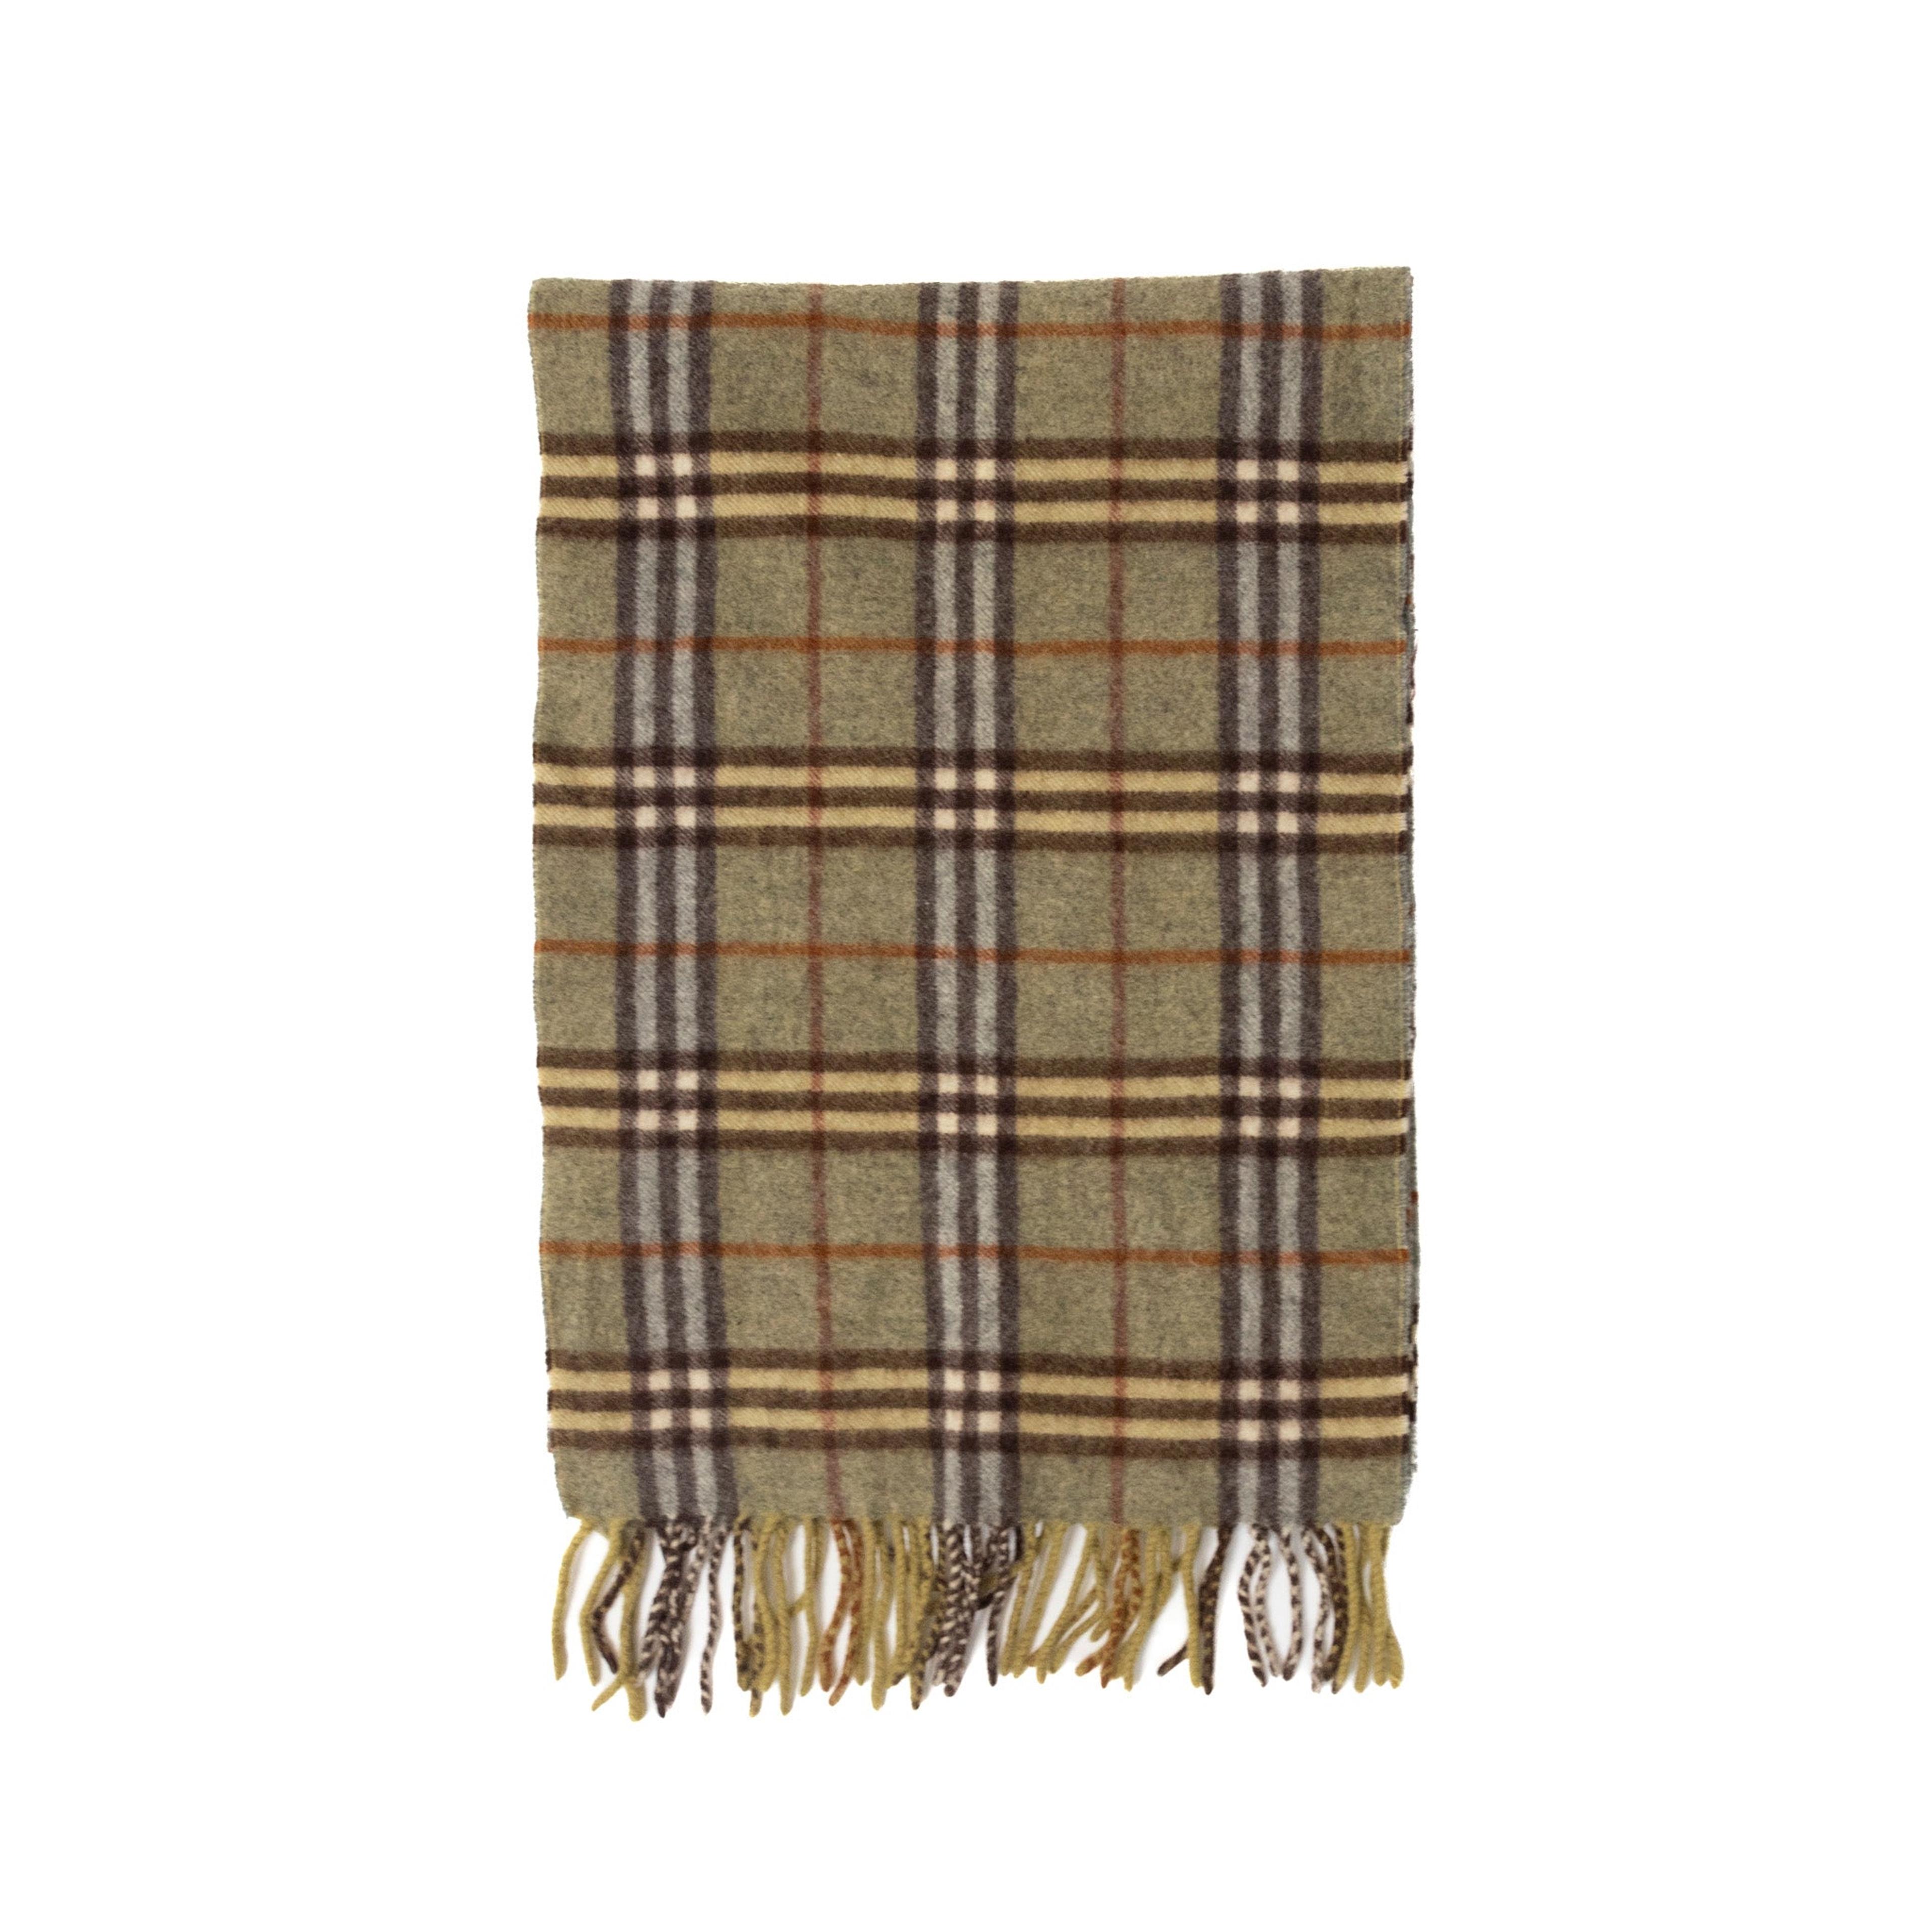 Alternate View 1 of Olive Green Nova Check Wool Burberry Scarf